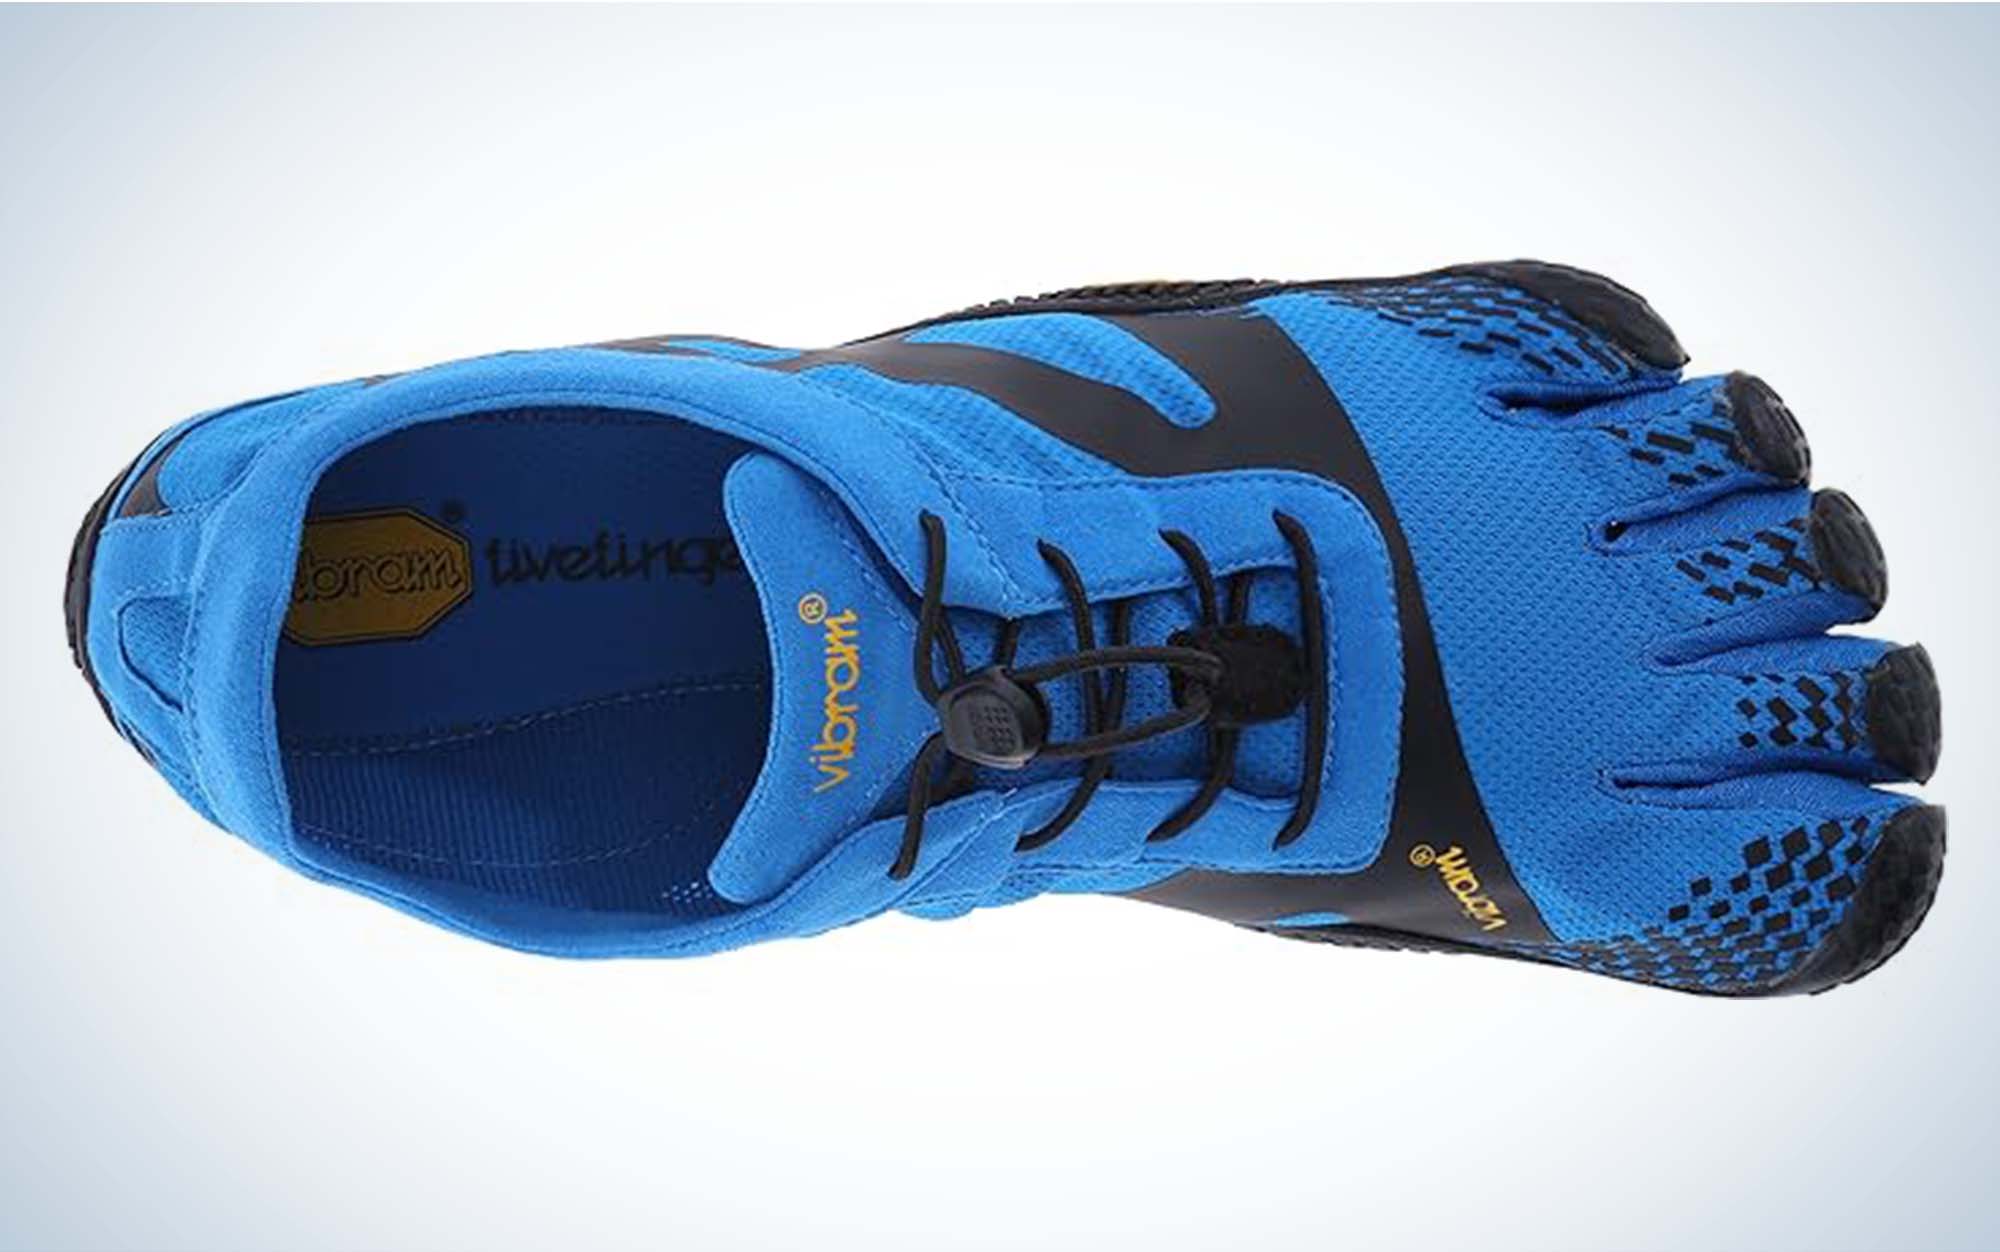 The best barefoot shoes for ground feel